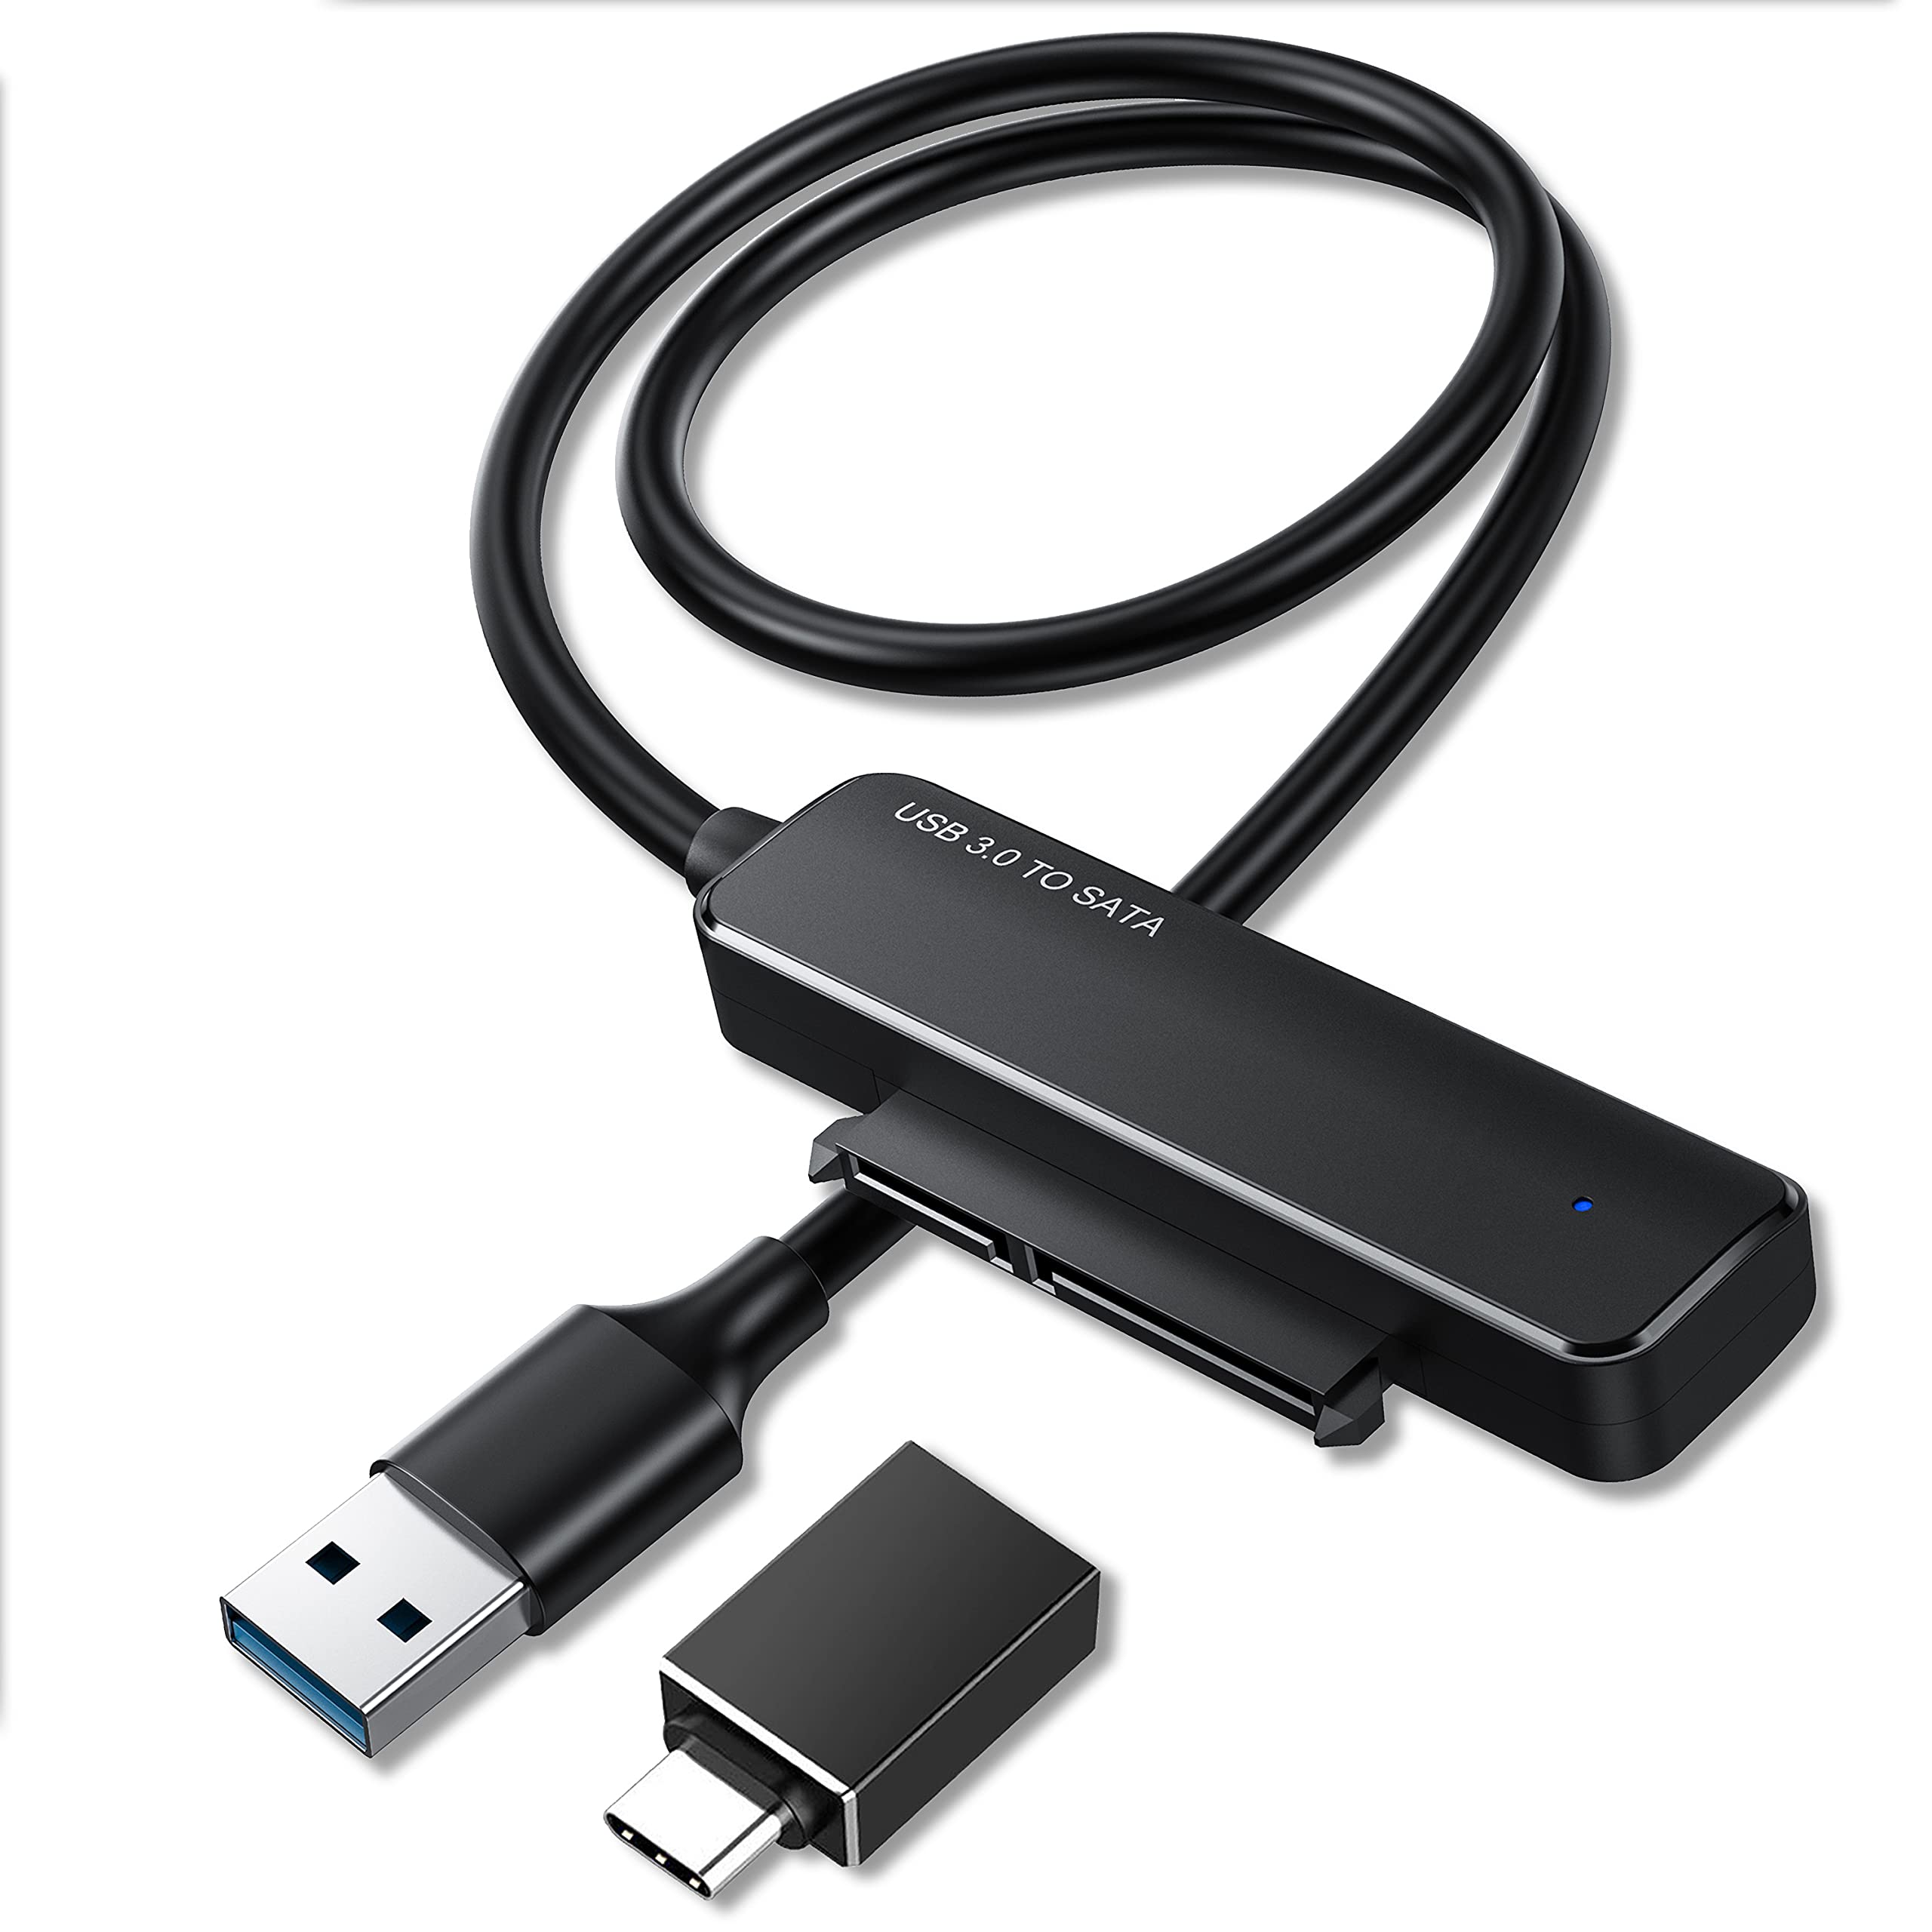 Try using a different USB 3.0 cable to rule out any cable-related issues.
Test the transfer speed with another USB device to check if the port itself is causing the slow transfer.